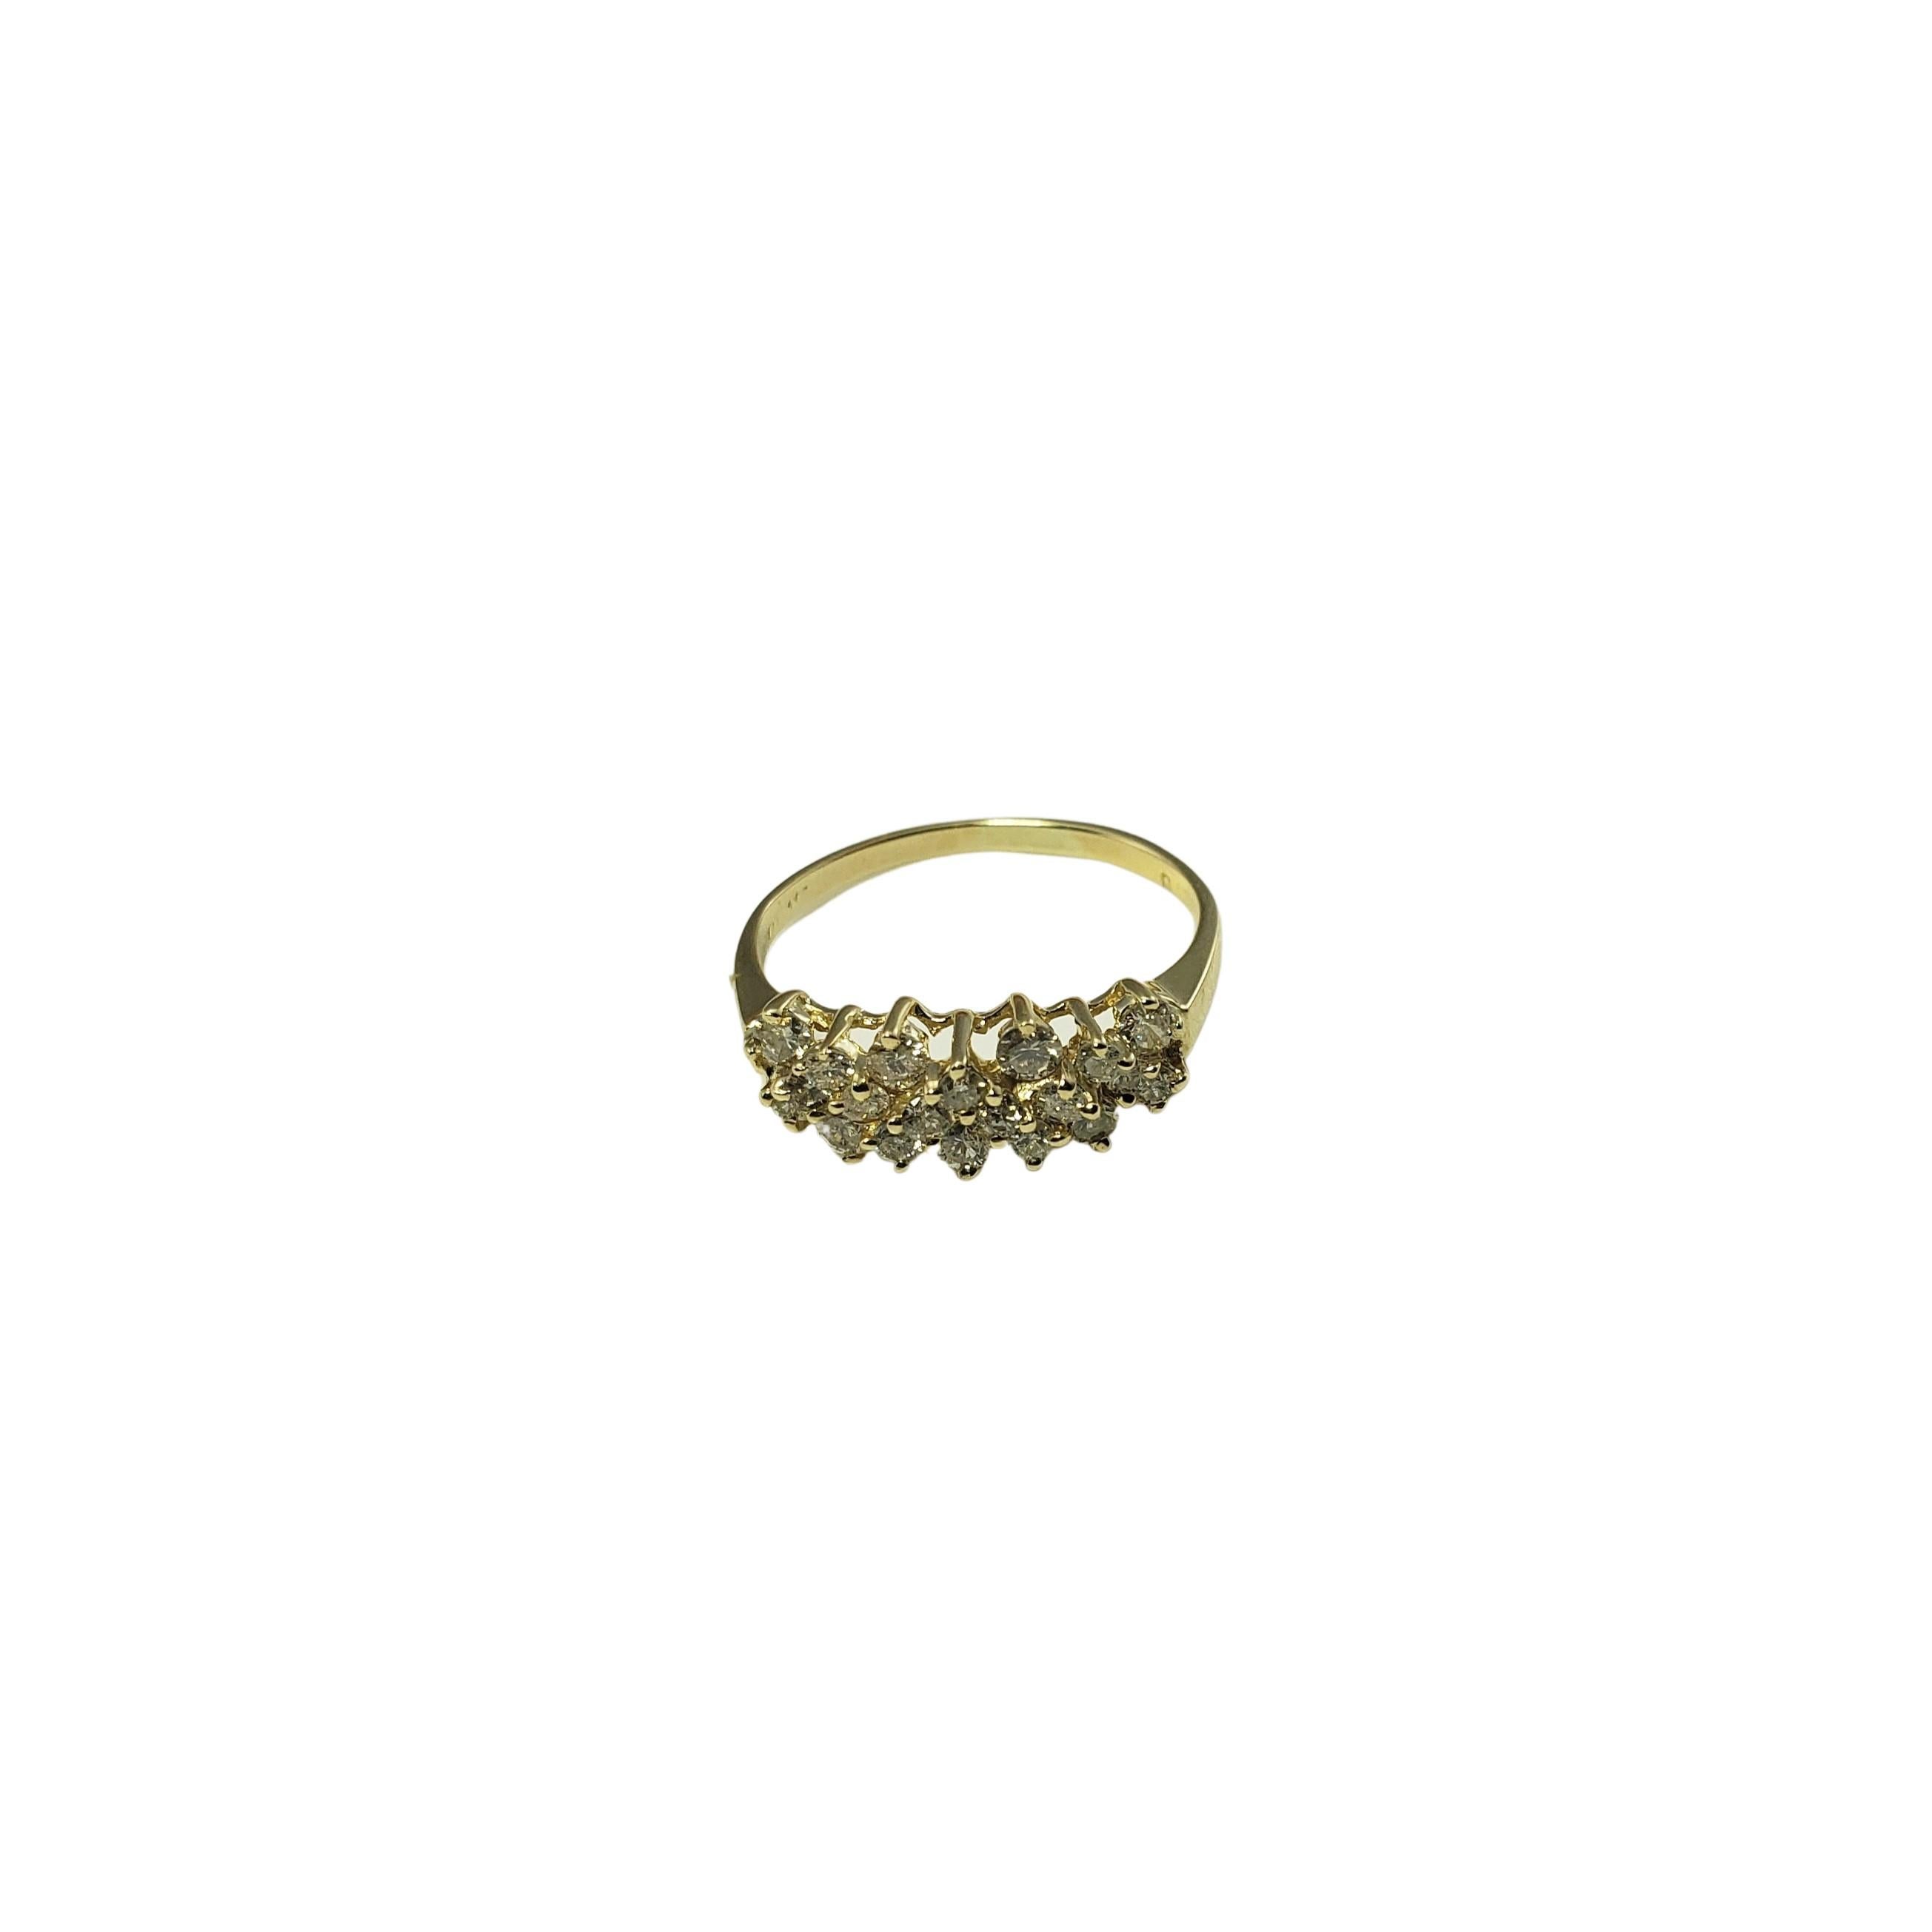 10 Karat Yellow Gold and Diamond Ring Size 7-

This sparkling ring features 20 round brilliant cut diamond set in classic 10K yellow gold.  Width:  7 mm.  Shank: 1.5 mm.

Approximate total diamond weight:  .45 ct.

Diamond color: I-K

Diamond